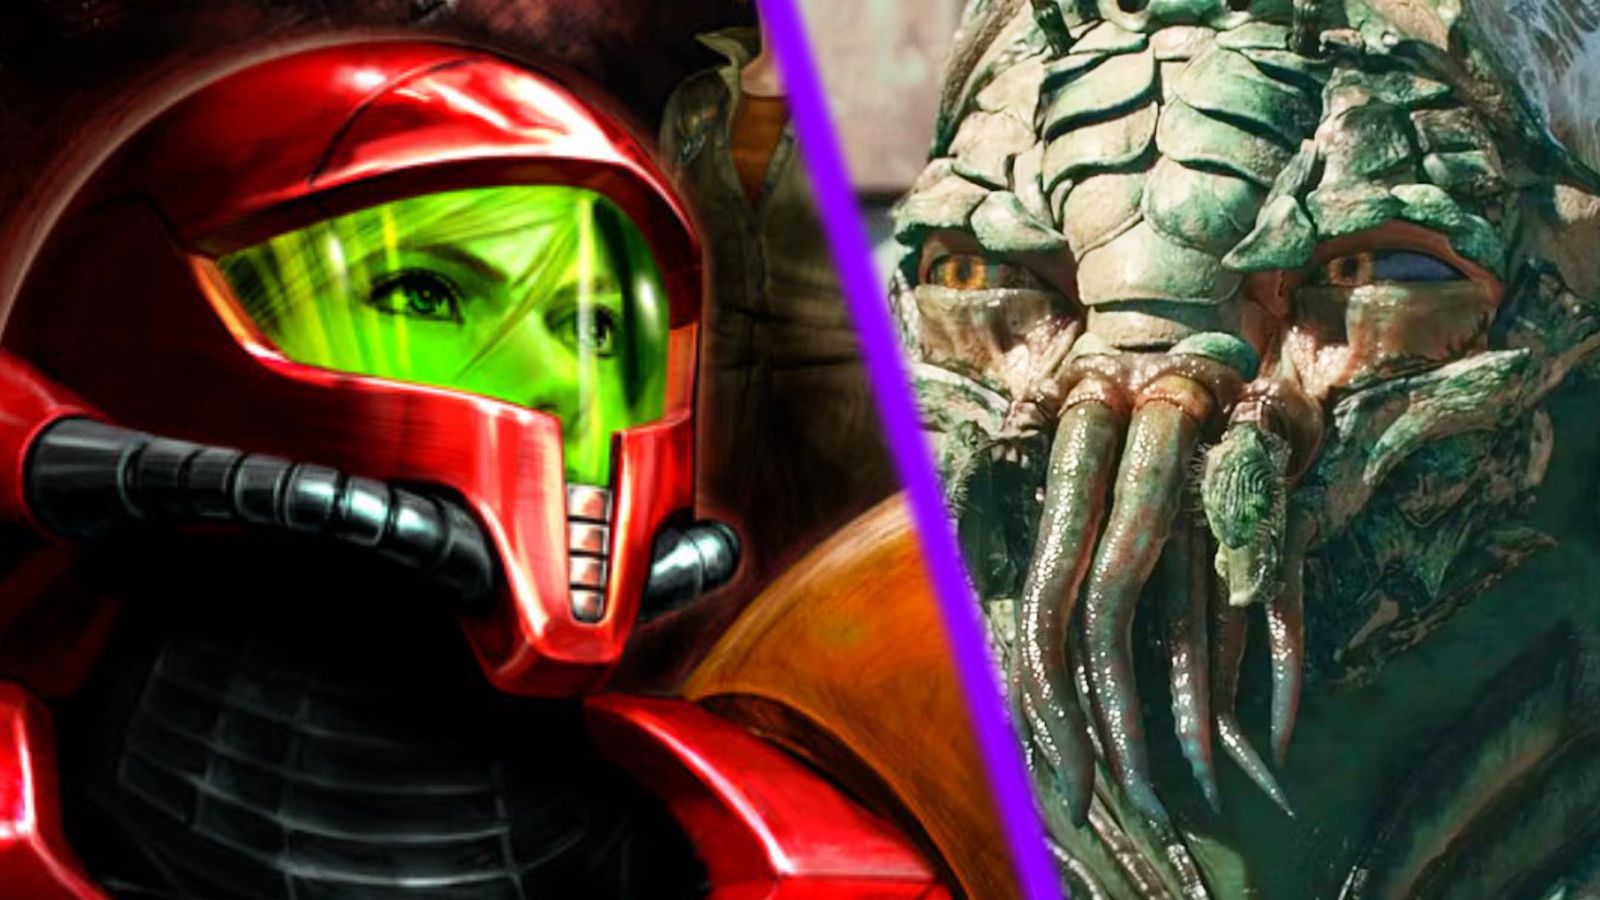 An image of Samus Aran from Metroid Other M next to an image of the main character of Neill Blomkamp’s district 9 